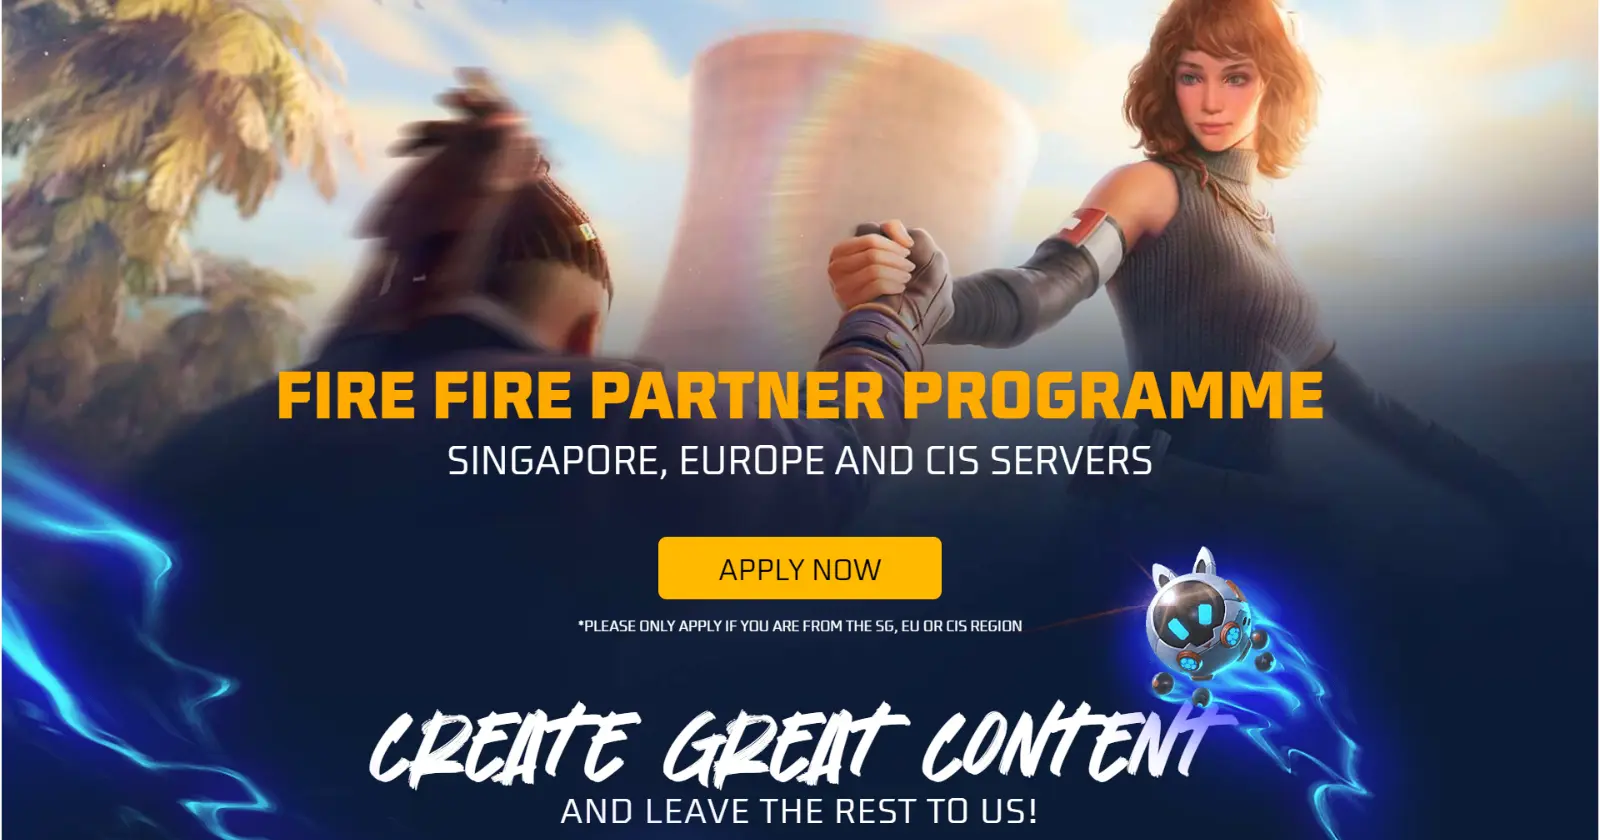 FIRE FIRE Partner Programme featuring two characters against a vibrant background with a rainbow and palm trees.